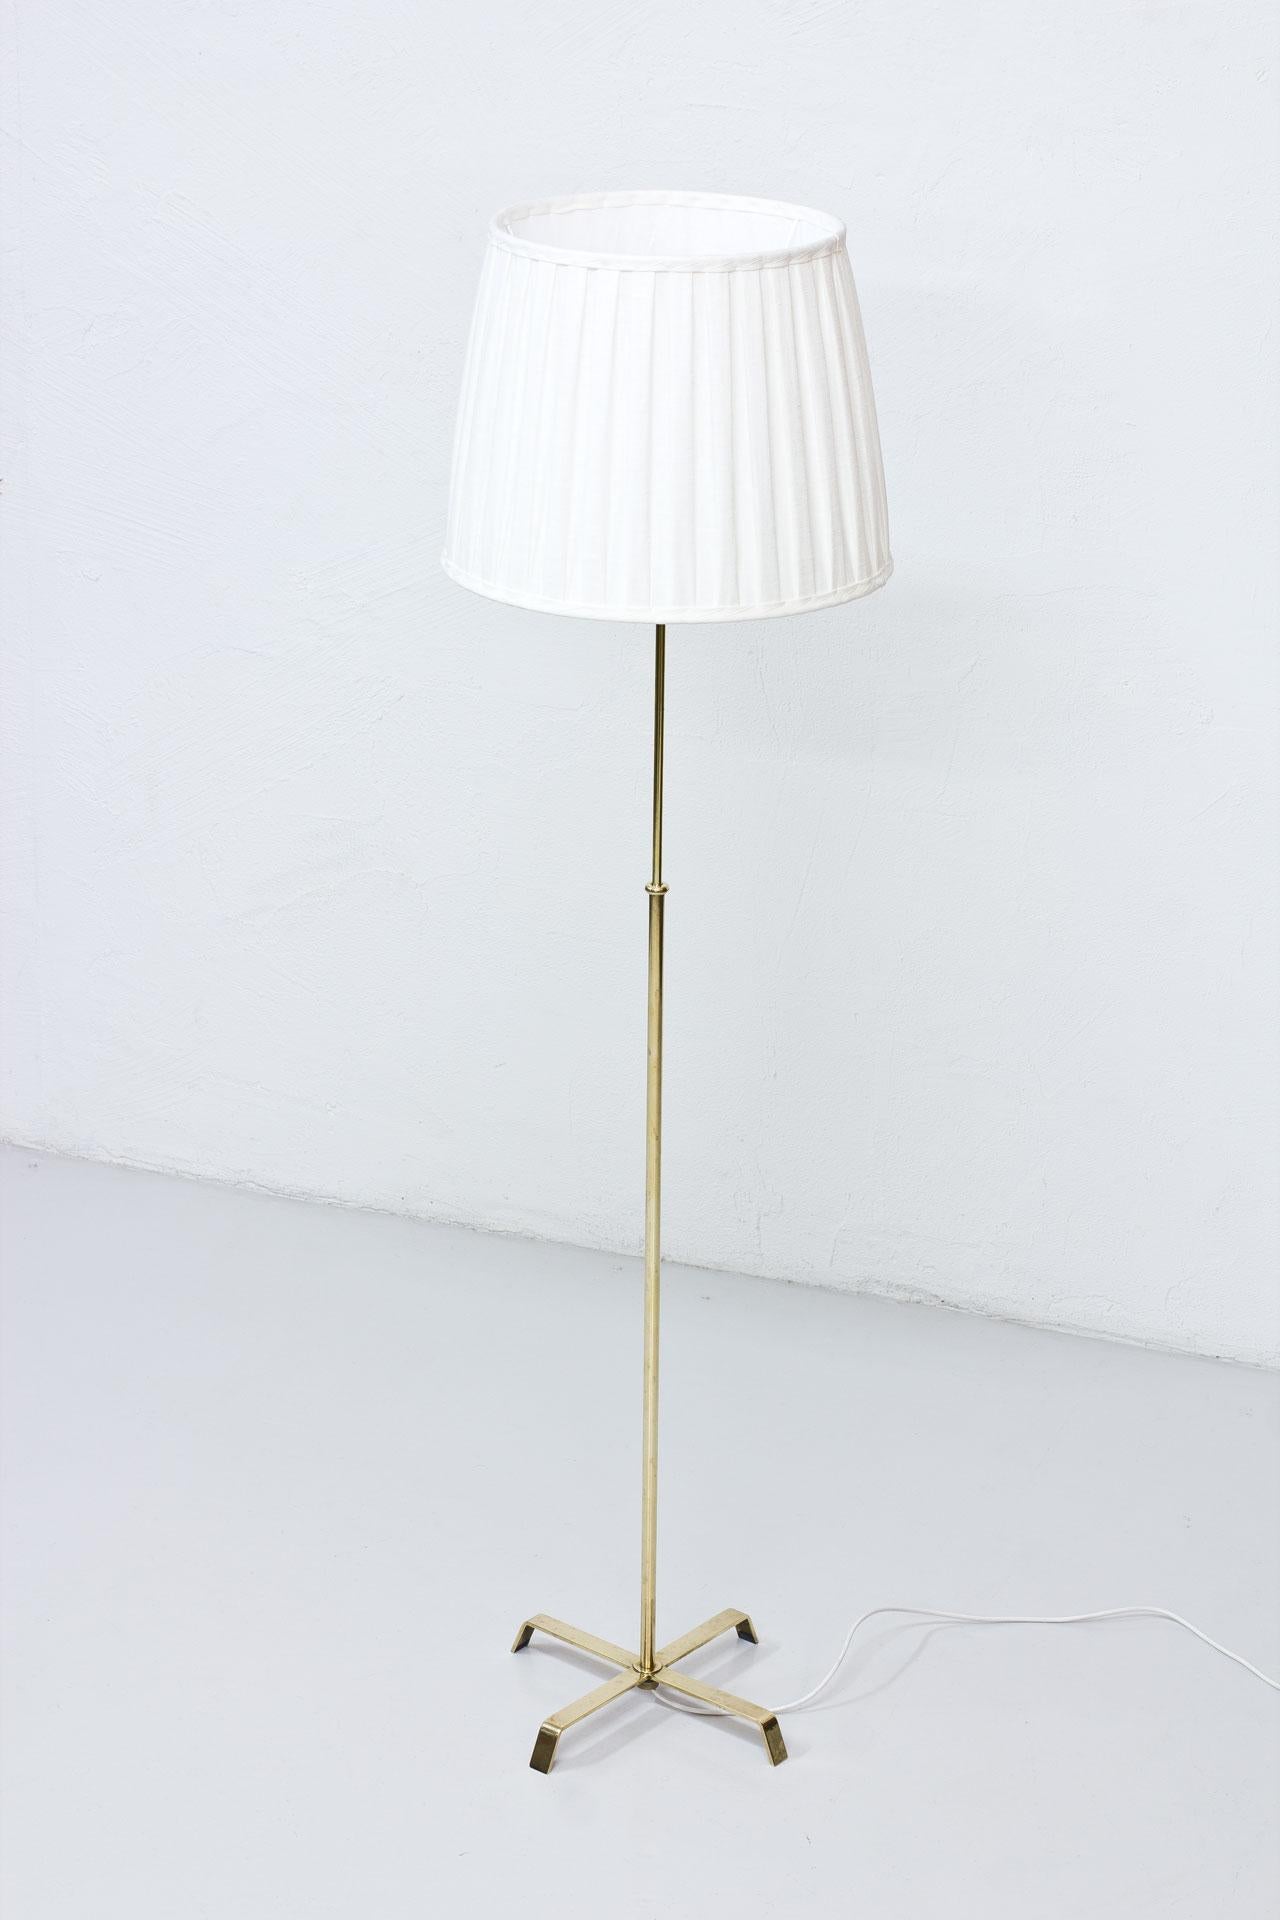 Floor lamp manufactured in Sweden by Böhlmarks lampfabrik during the 1940s. Made from brass with hand pleated lamp shade in linen fabric. Adjustable height of the stem. Engraved on the base.